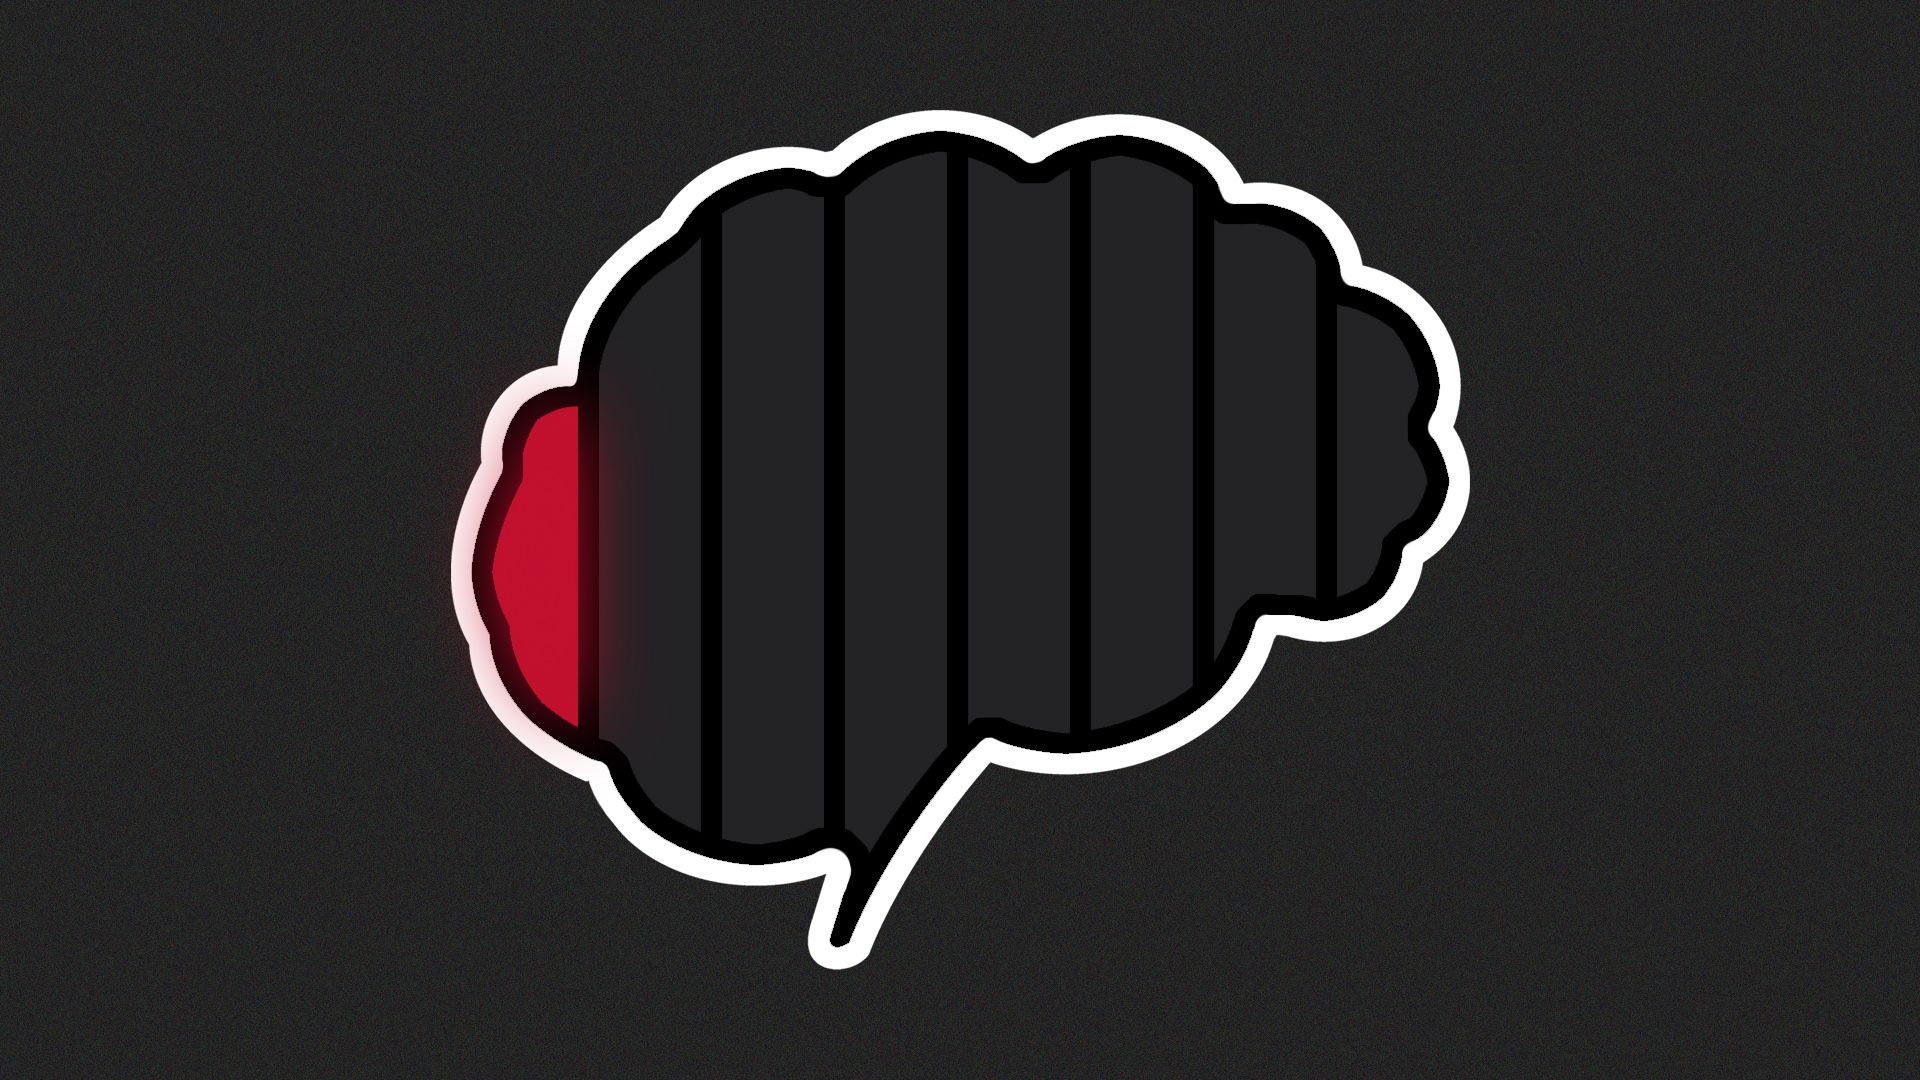 A photo of a depleted brain with a red bar to the left hand side showing it's close to empty.